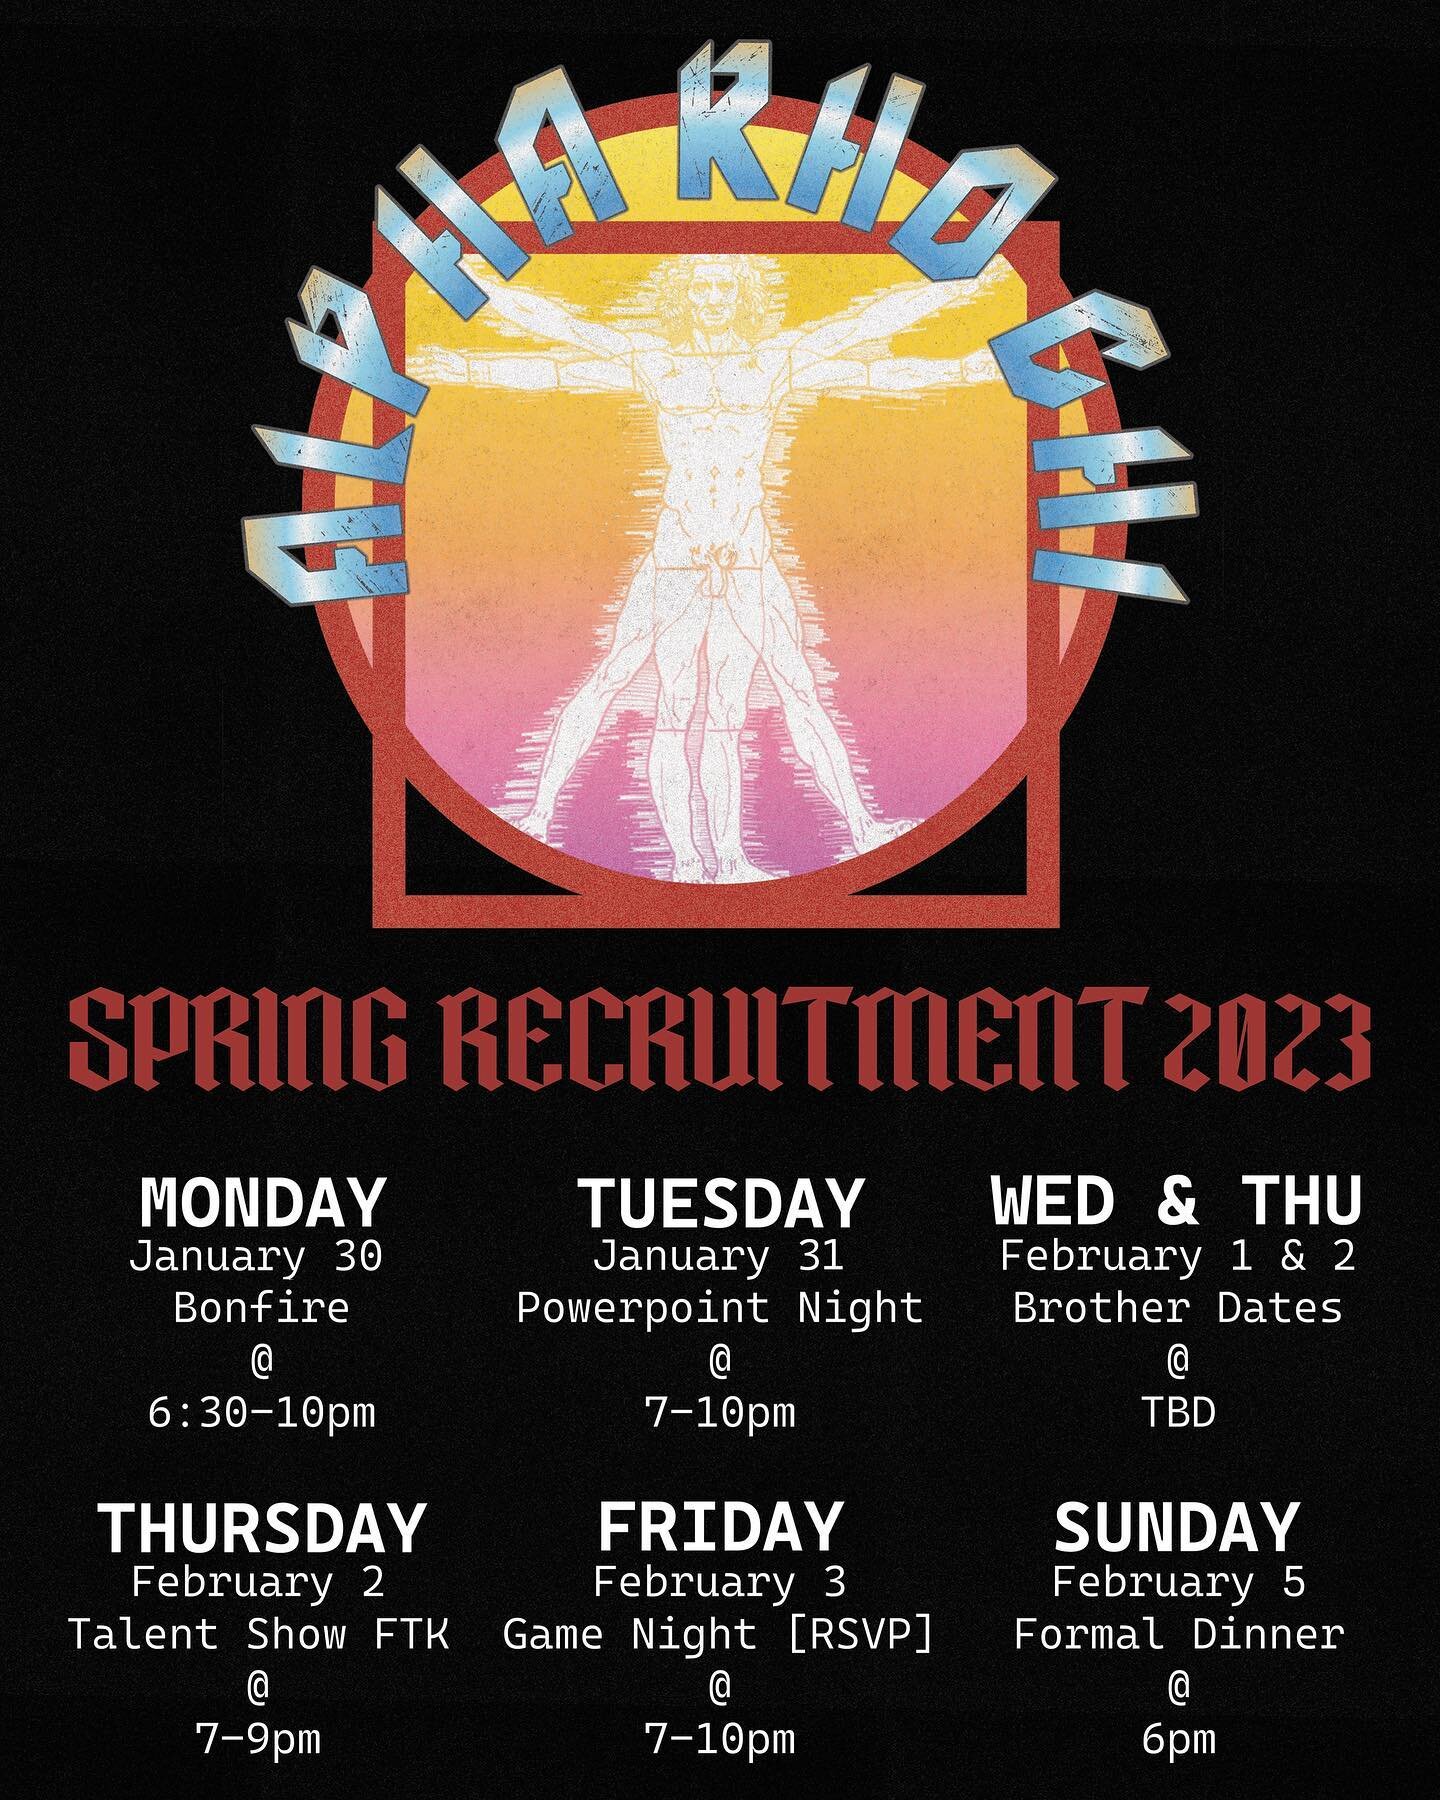 APX Spring 2023 Recruitment is almost here!

Our first event takes place next Monday, January 30 at 6:30 PM and events continue throughout next week. 

If you are at all interested in rushing we hope you join us next week, and feel free to message wi